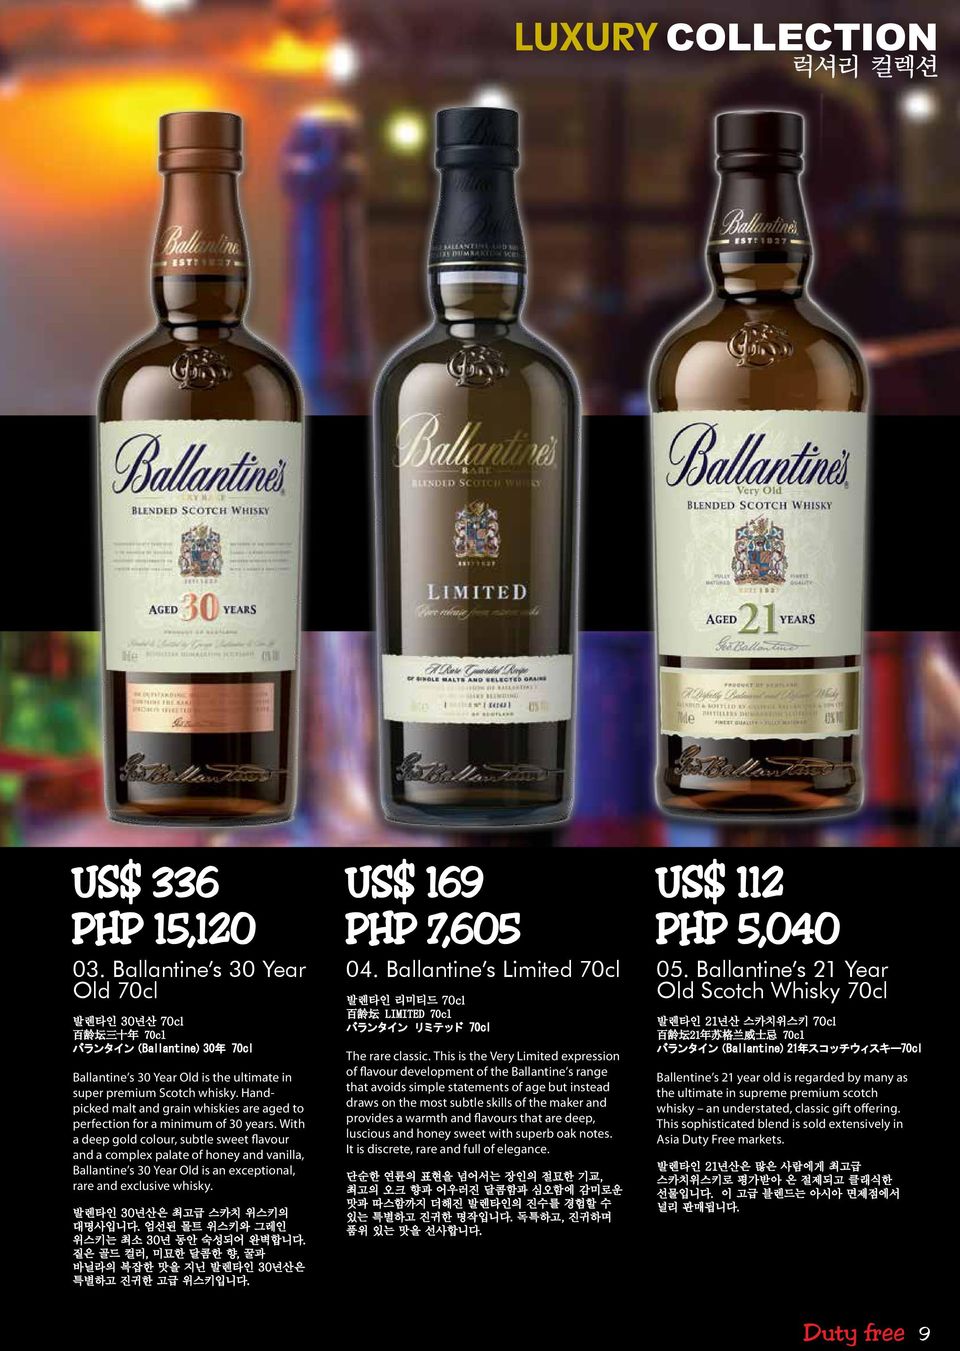 Handpicked malt and grain whiskies are aged to perfection for a minimum of 30 years.